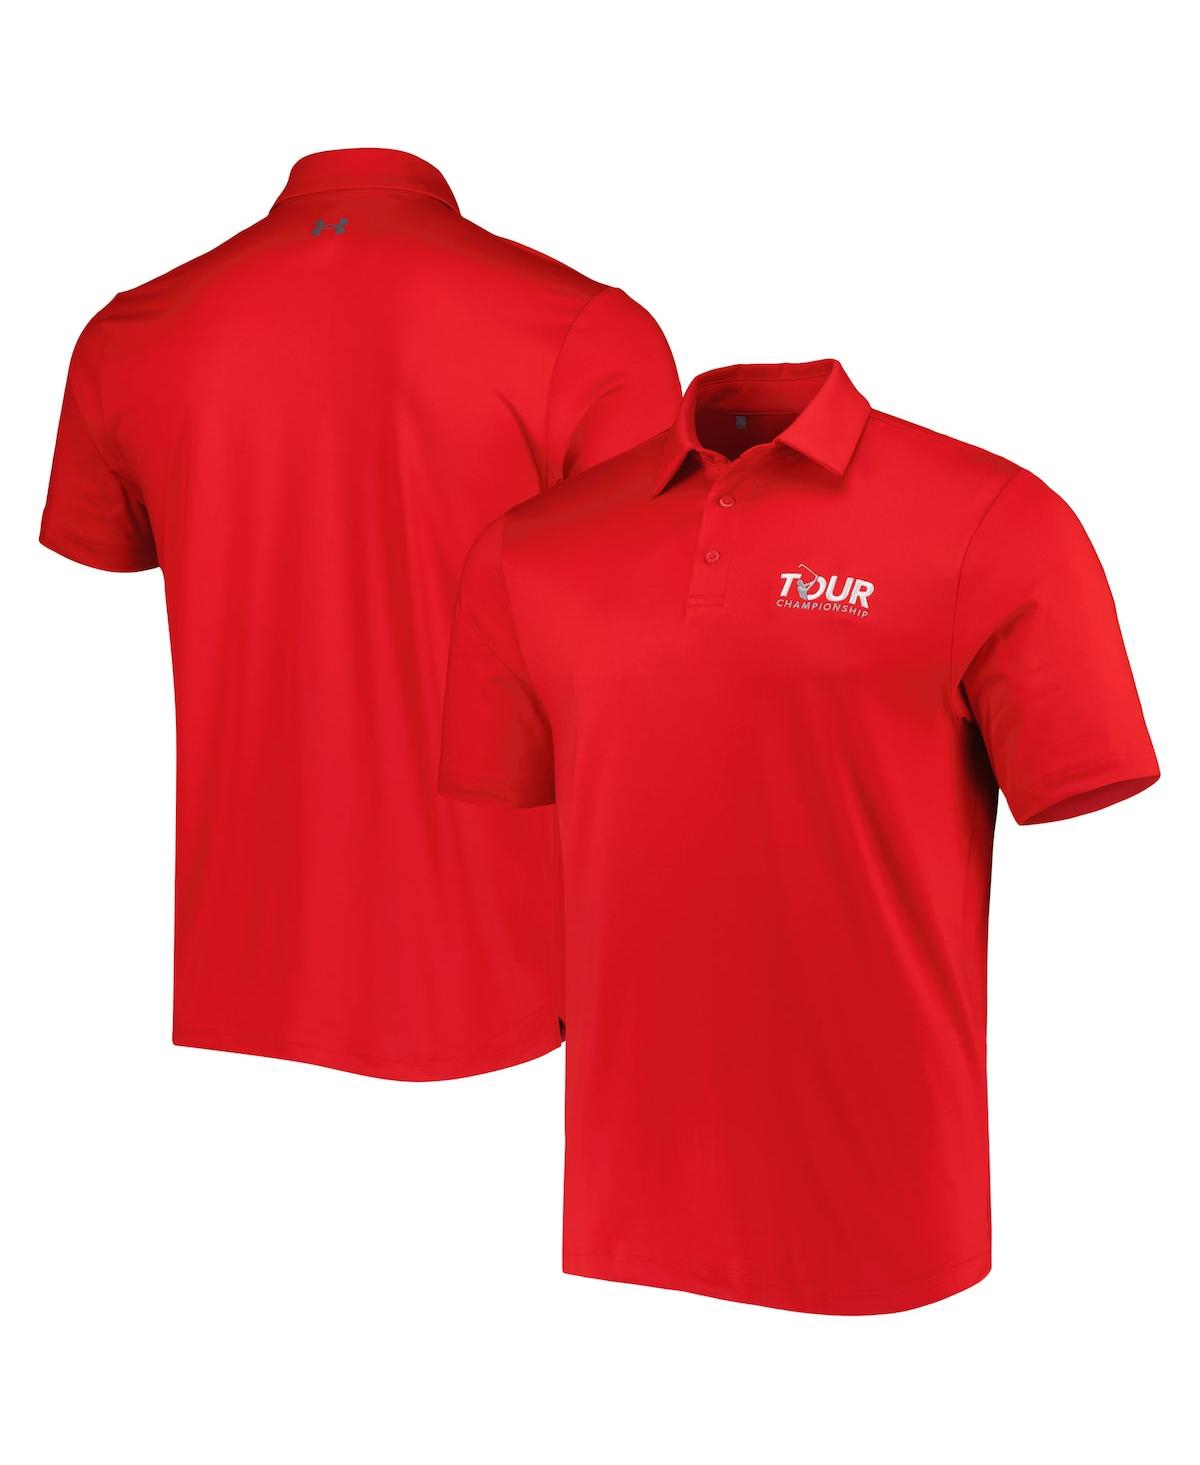 UNDER ARMOUR MEN'S UNDER ARMOUR RED TOUR CHAMPIONSHIP T2 POLO SHIRT